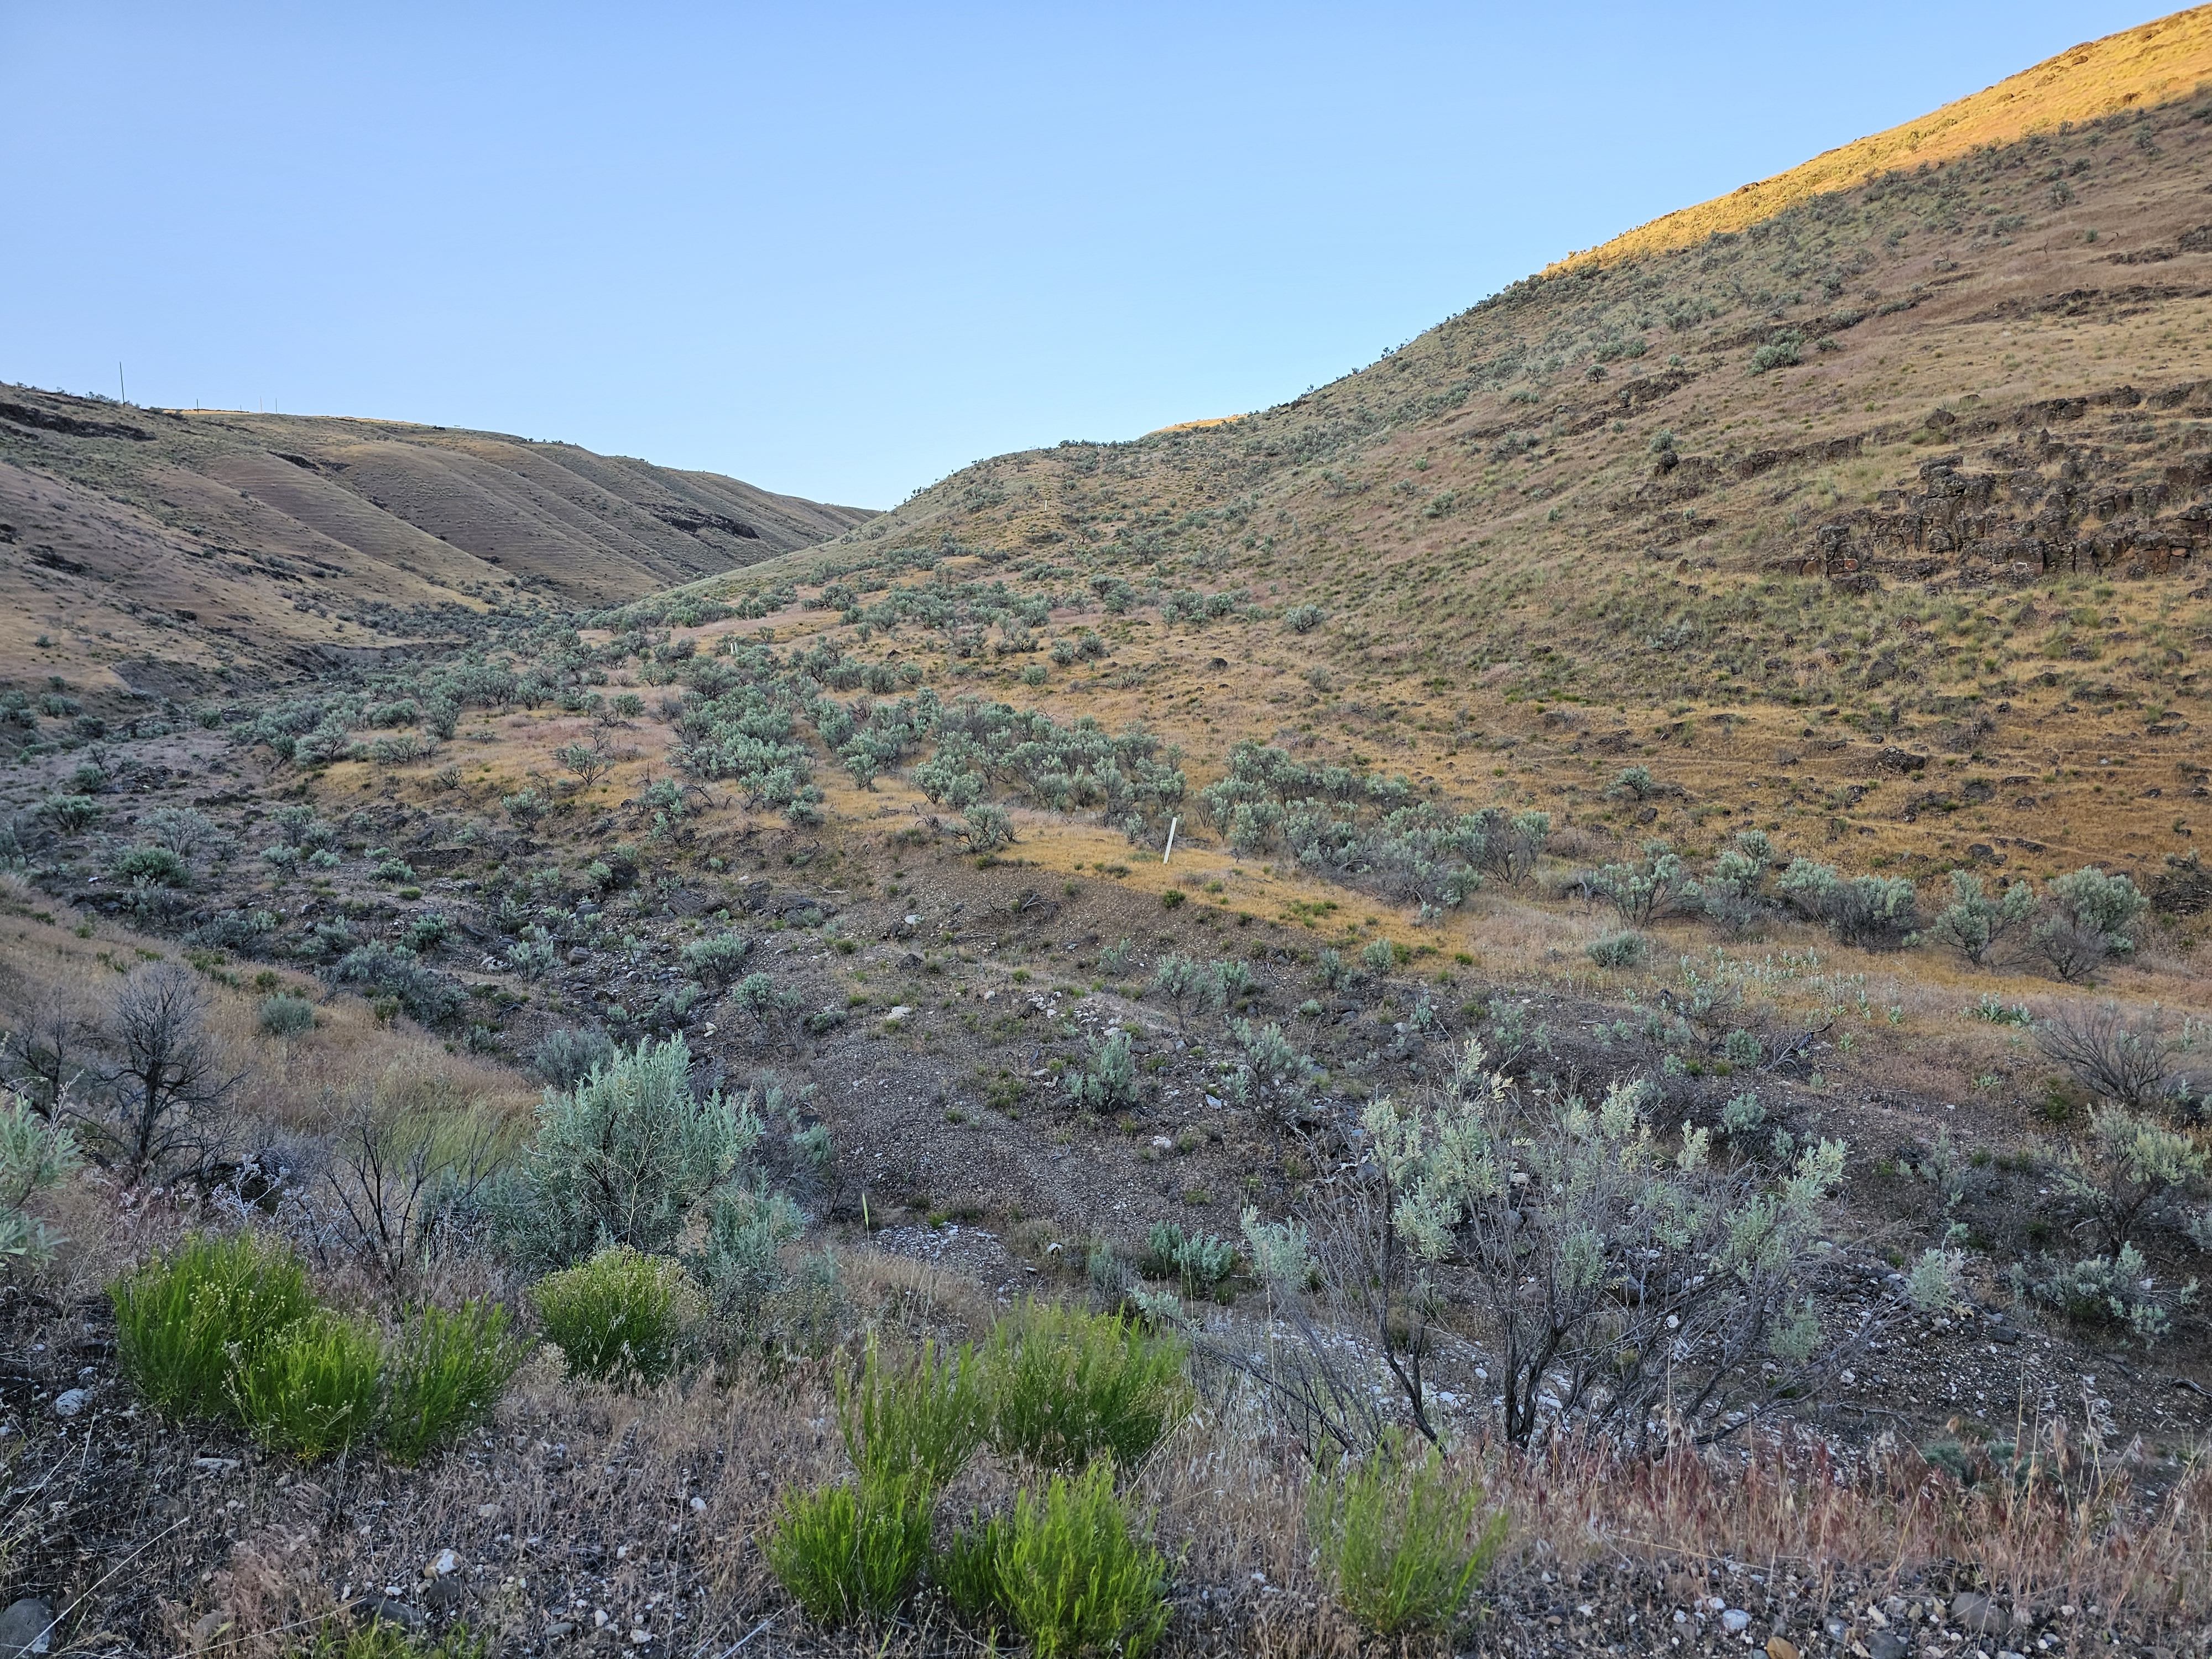 View of hillside descent of the Oregon Trail at the John Day crossing.